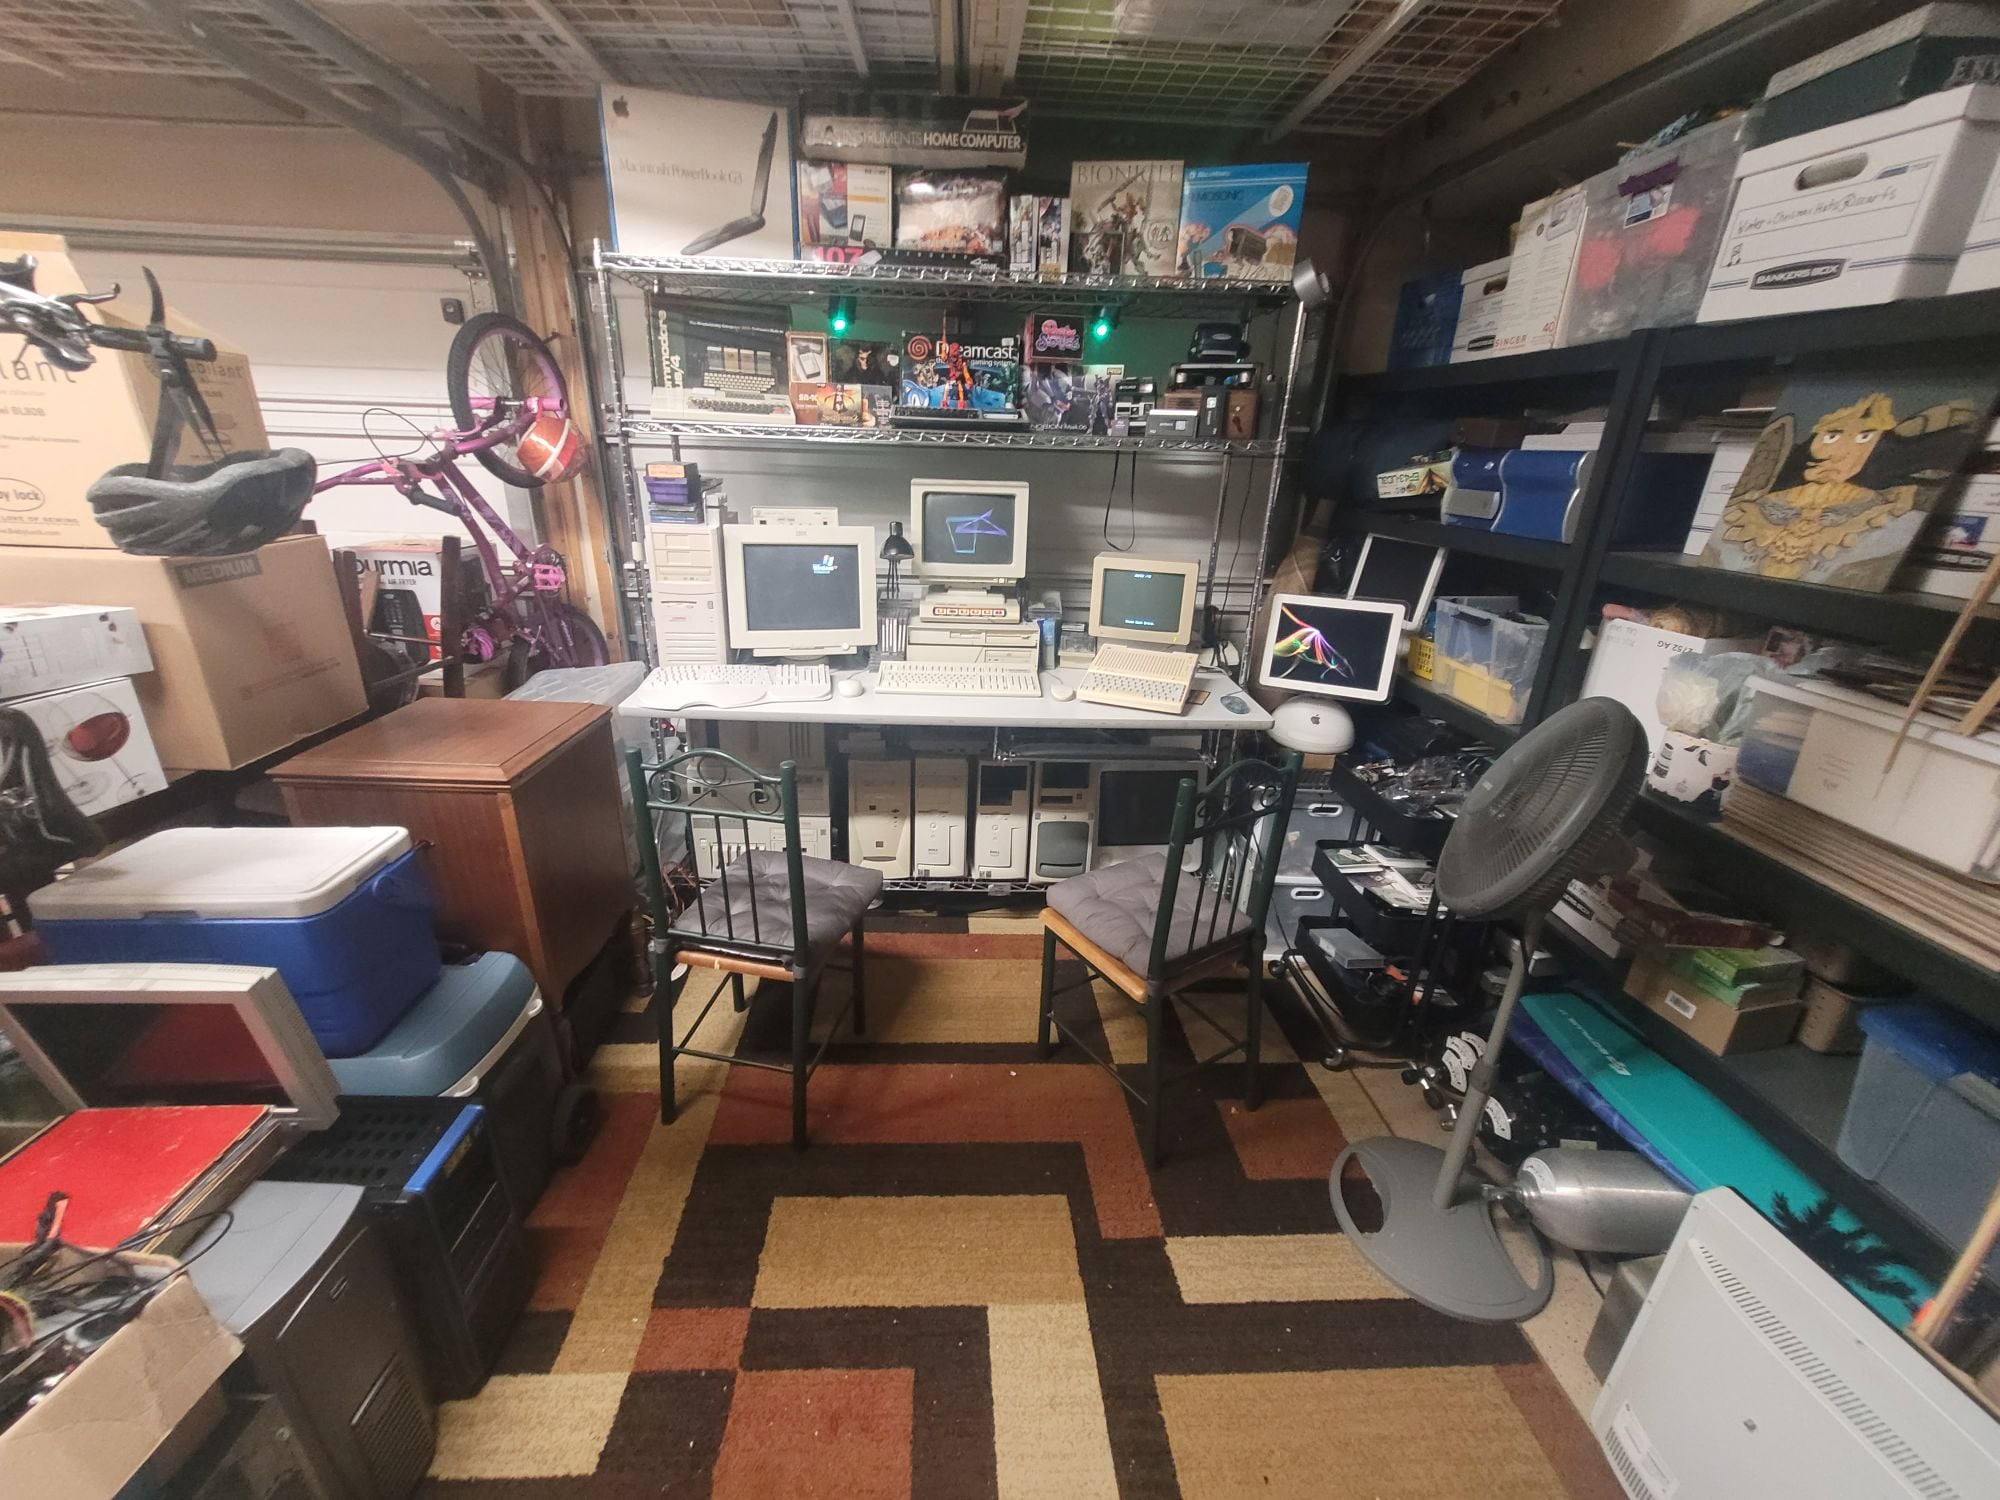 Room full of old vintage computers with an Intel 486, Apple IIc, IBM computers, and more collectable computers from the 90s and 80s